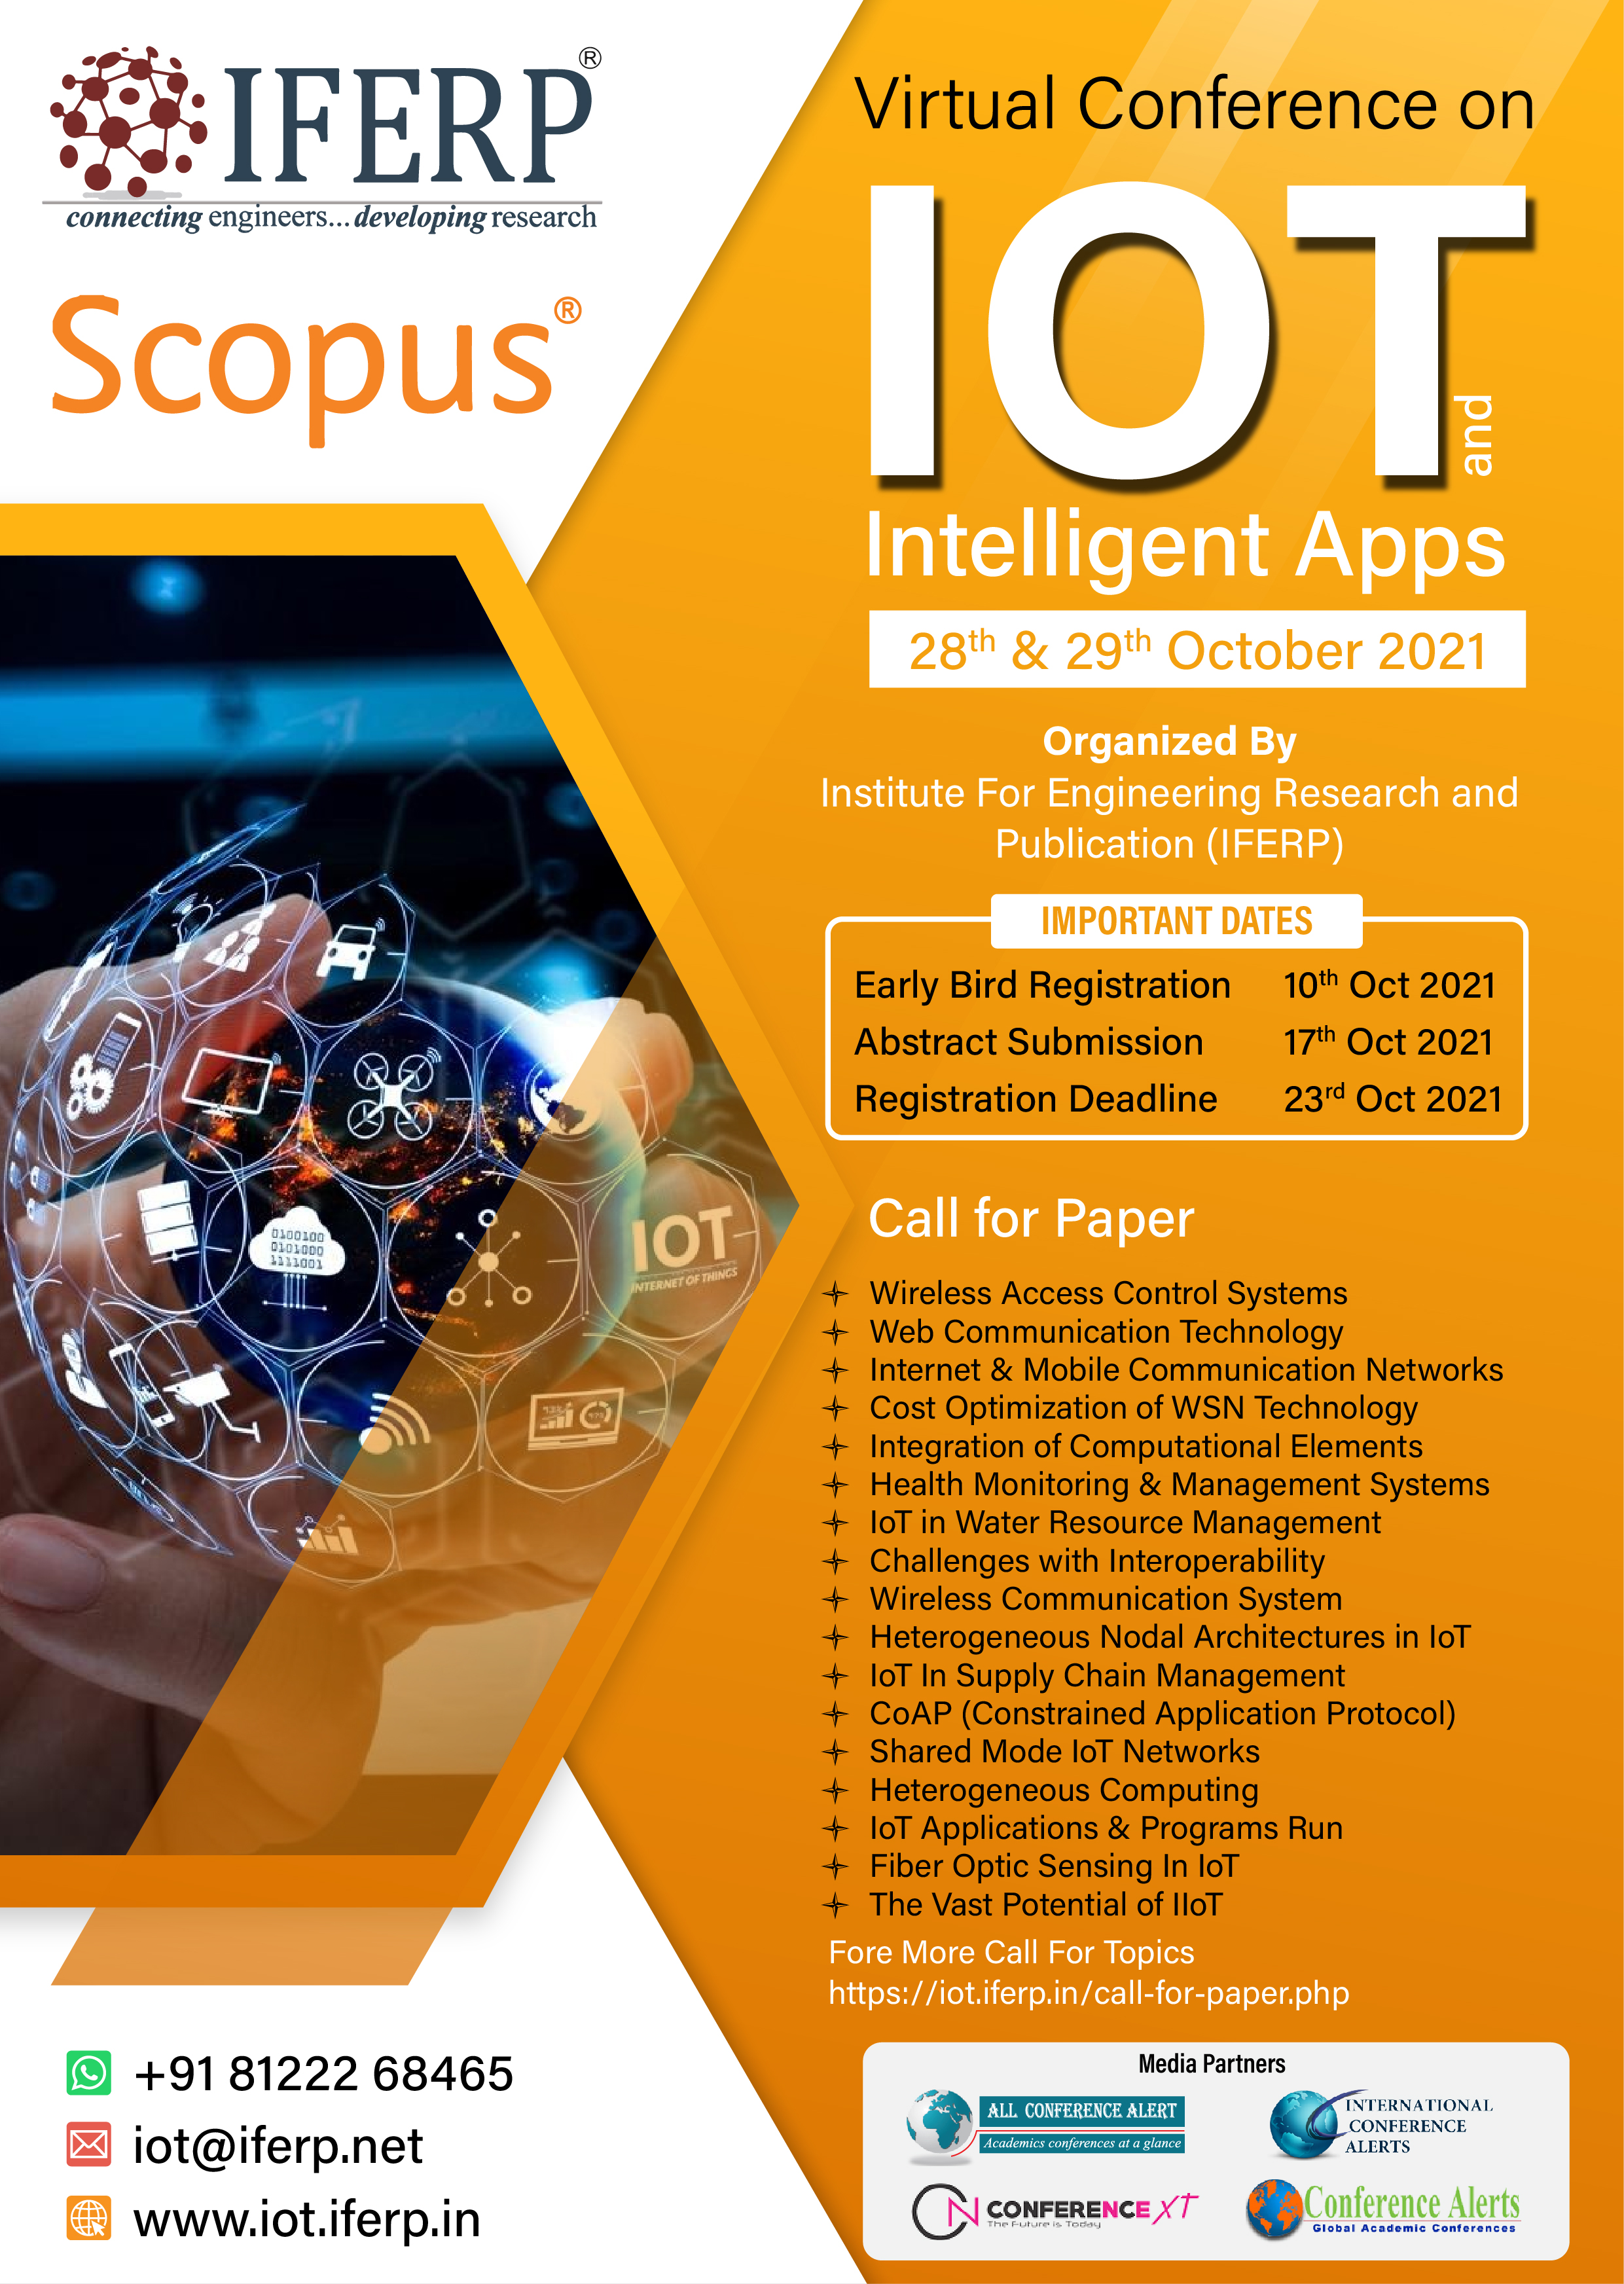 International Virtual Conference on IoT and Intelligent Applications